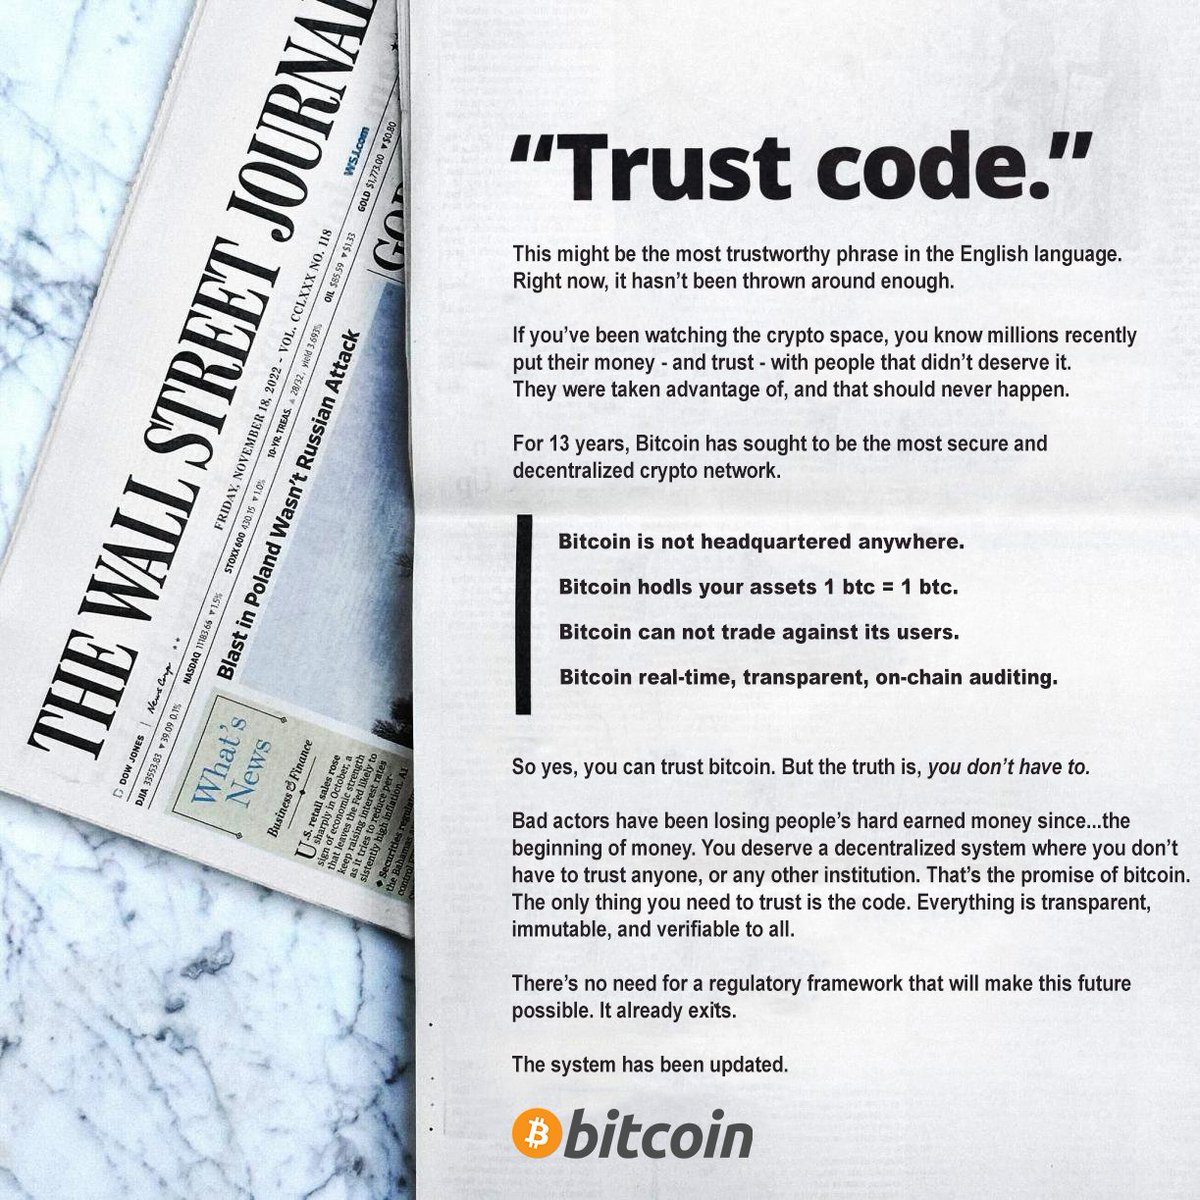 Bitcoin, the system has been updated. A play on Coinbase's ad, Nov 2022